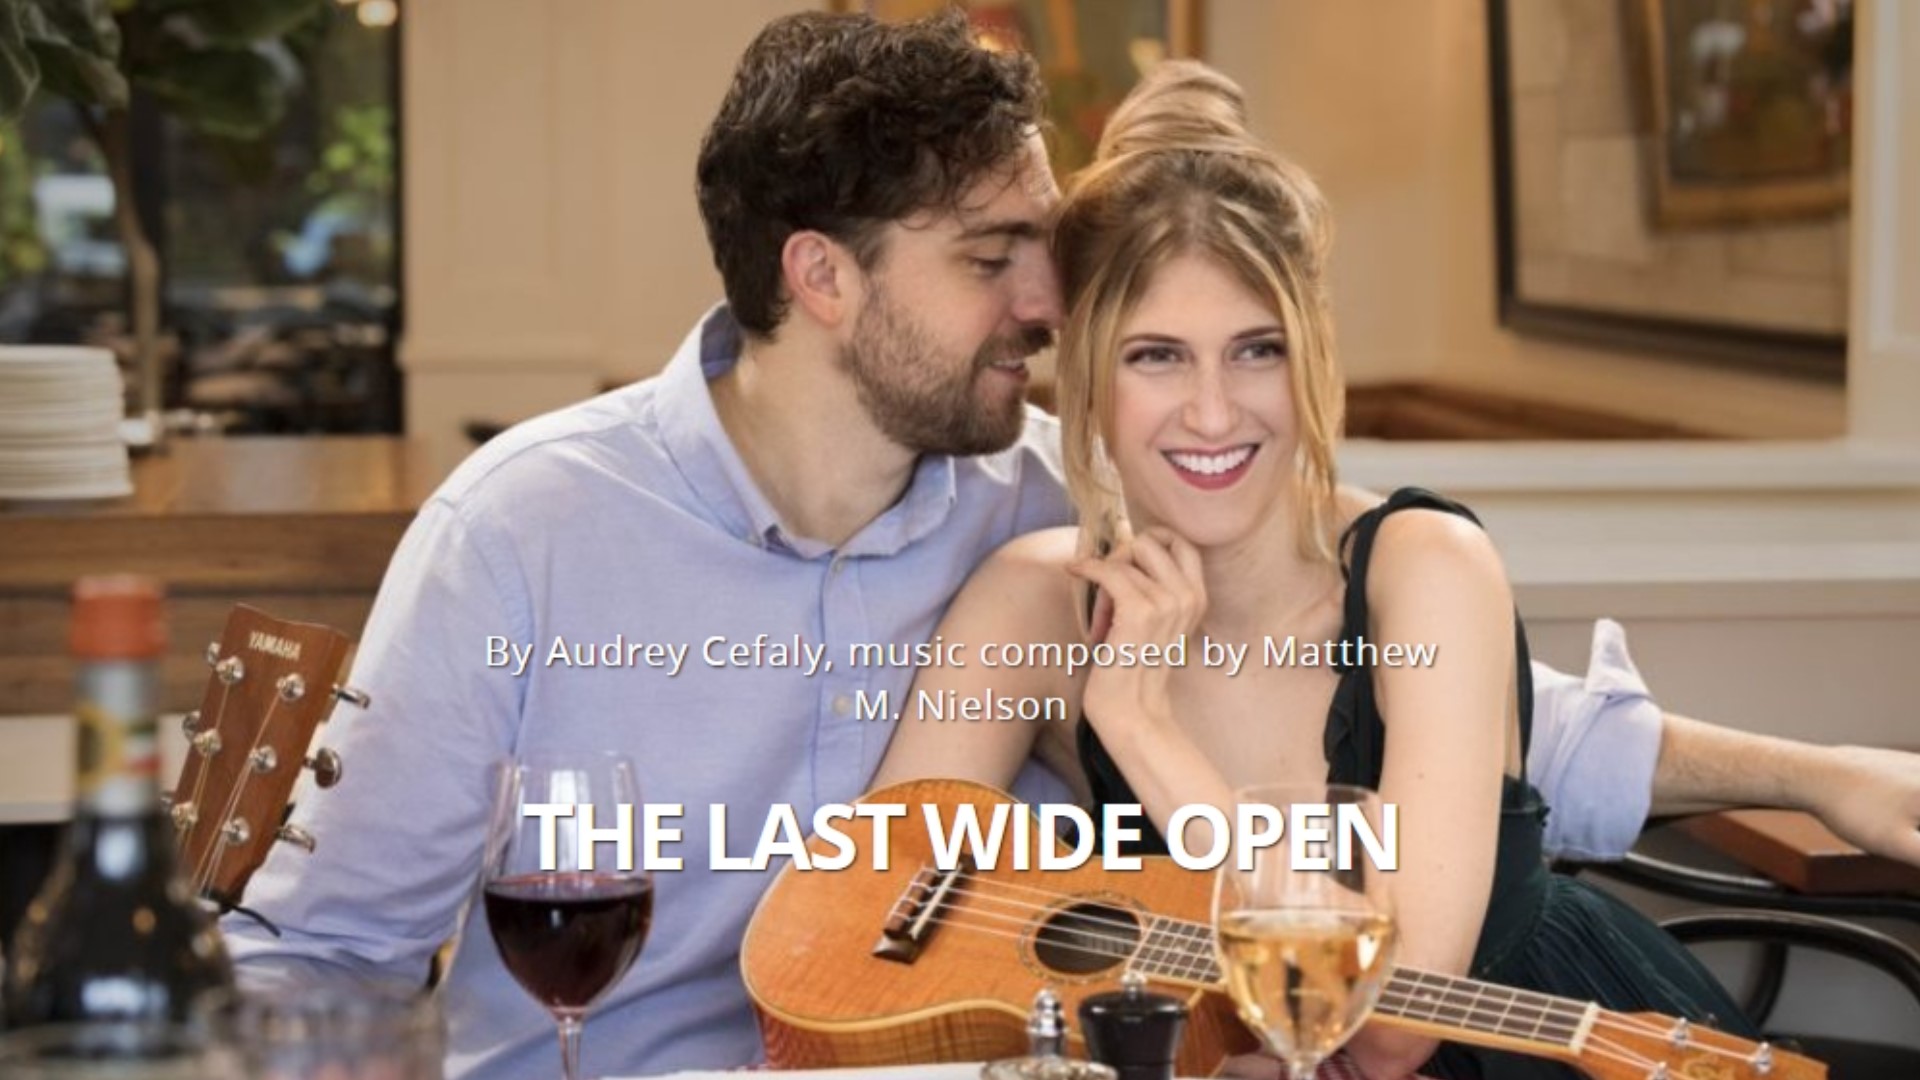 'The Last Wide Open' is a show about how adventurous yet mysterious love is, and how the universe overall brings us together.